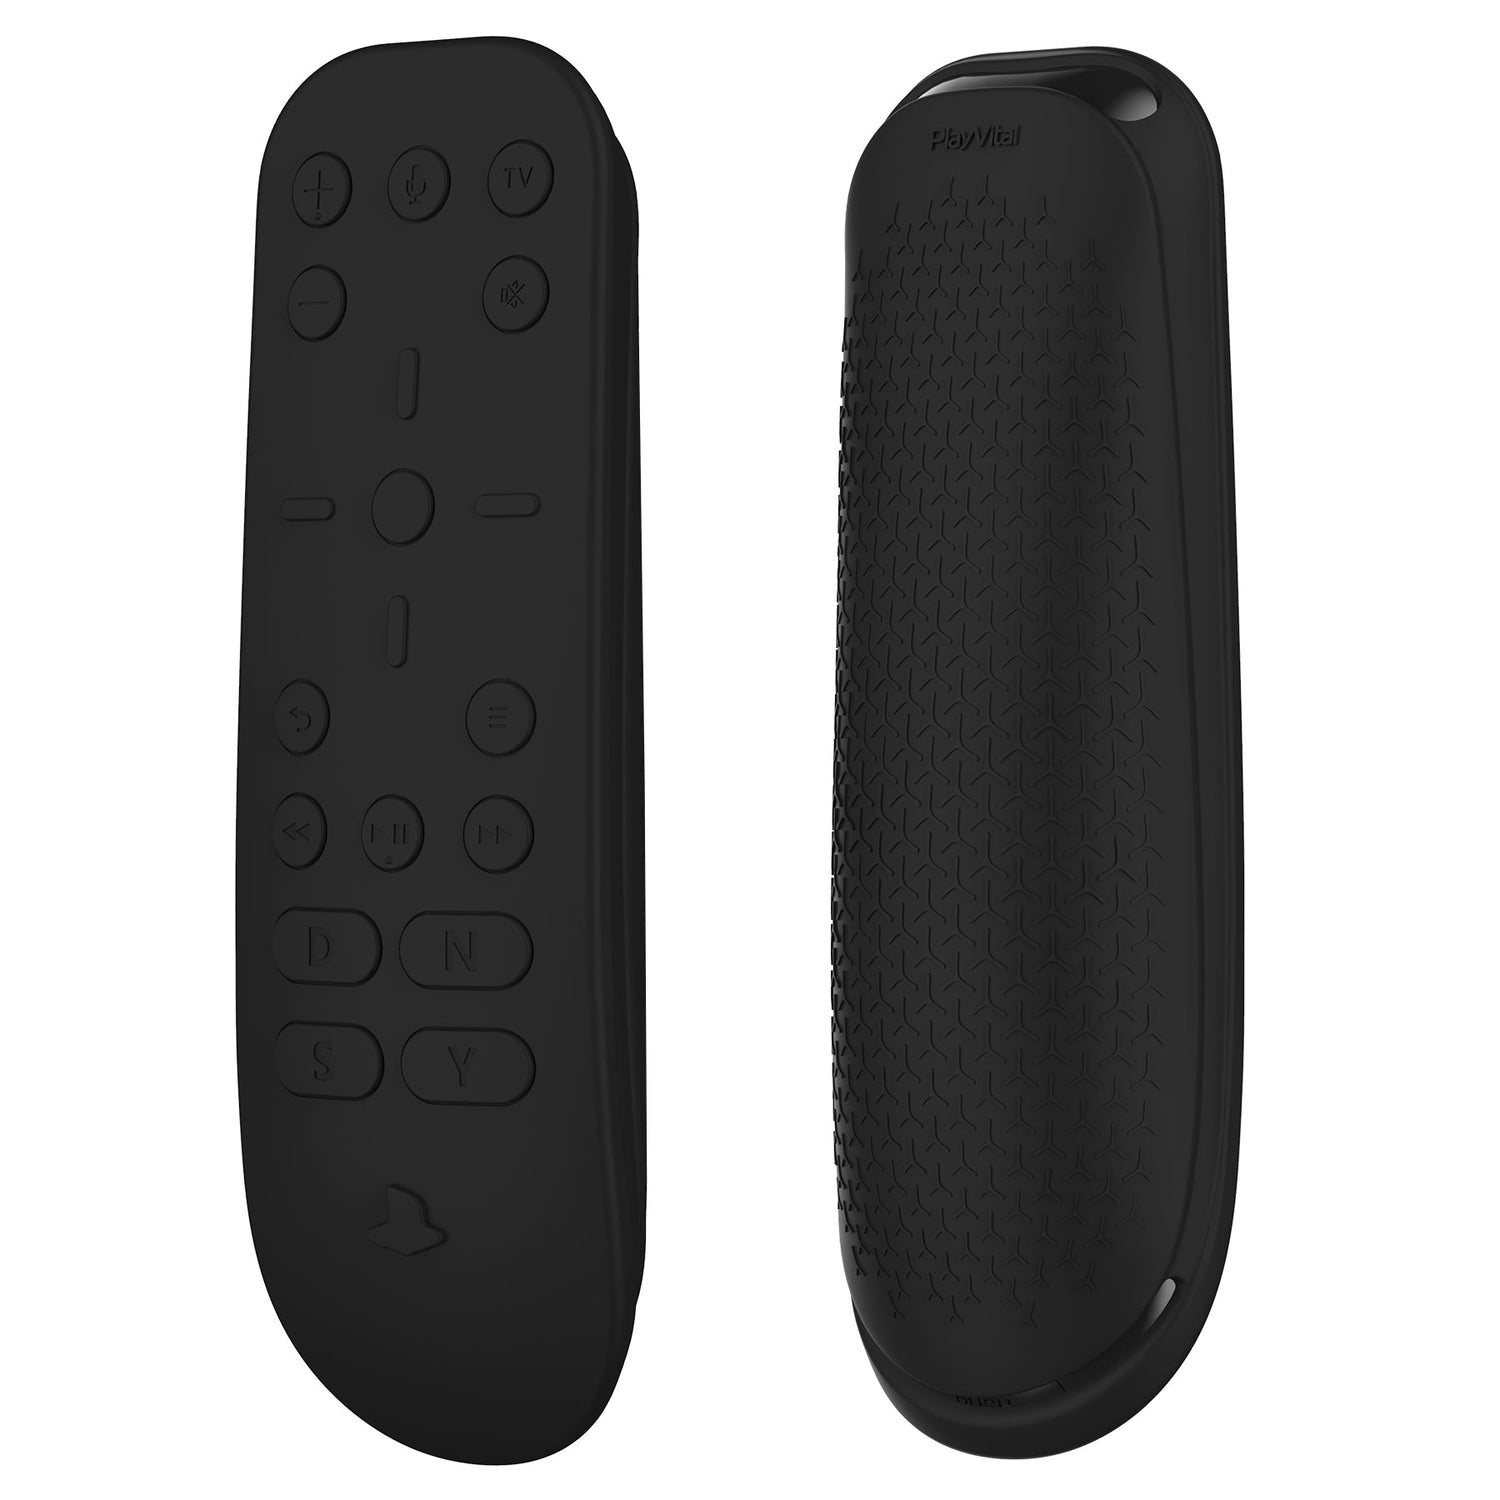 For PS5 Remote Cover